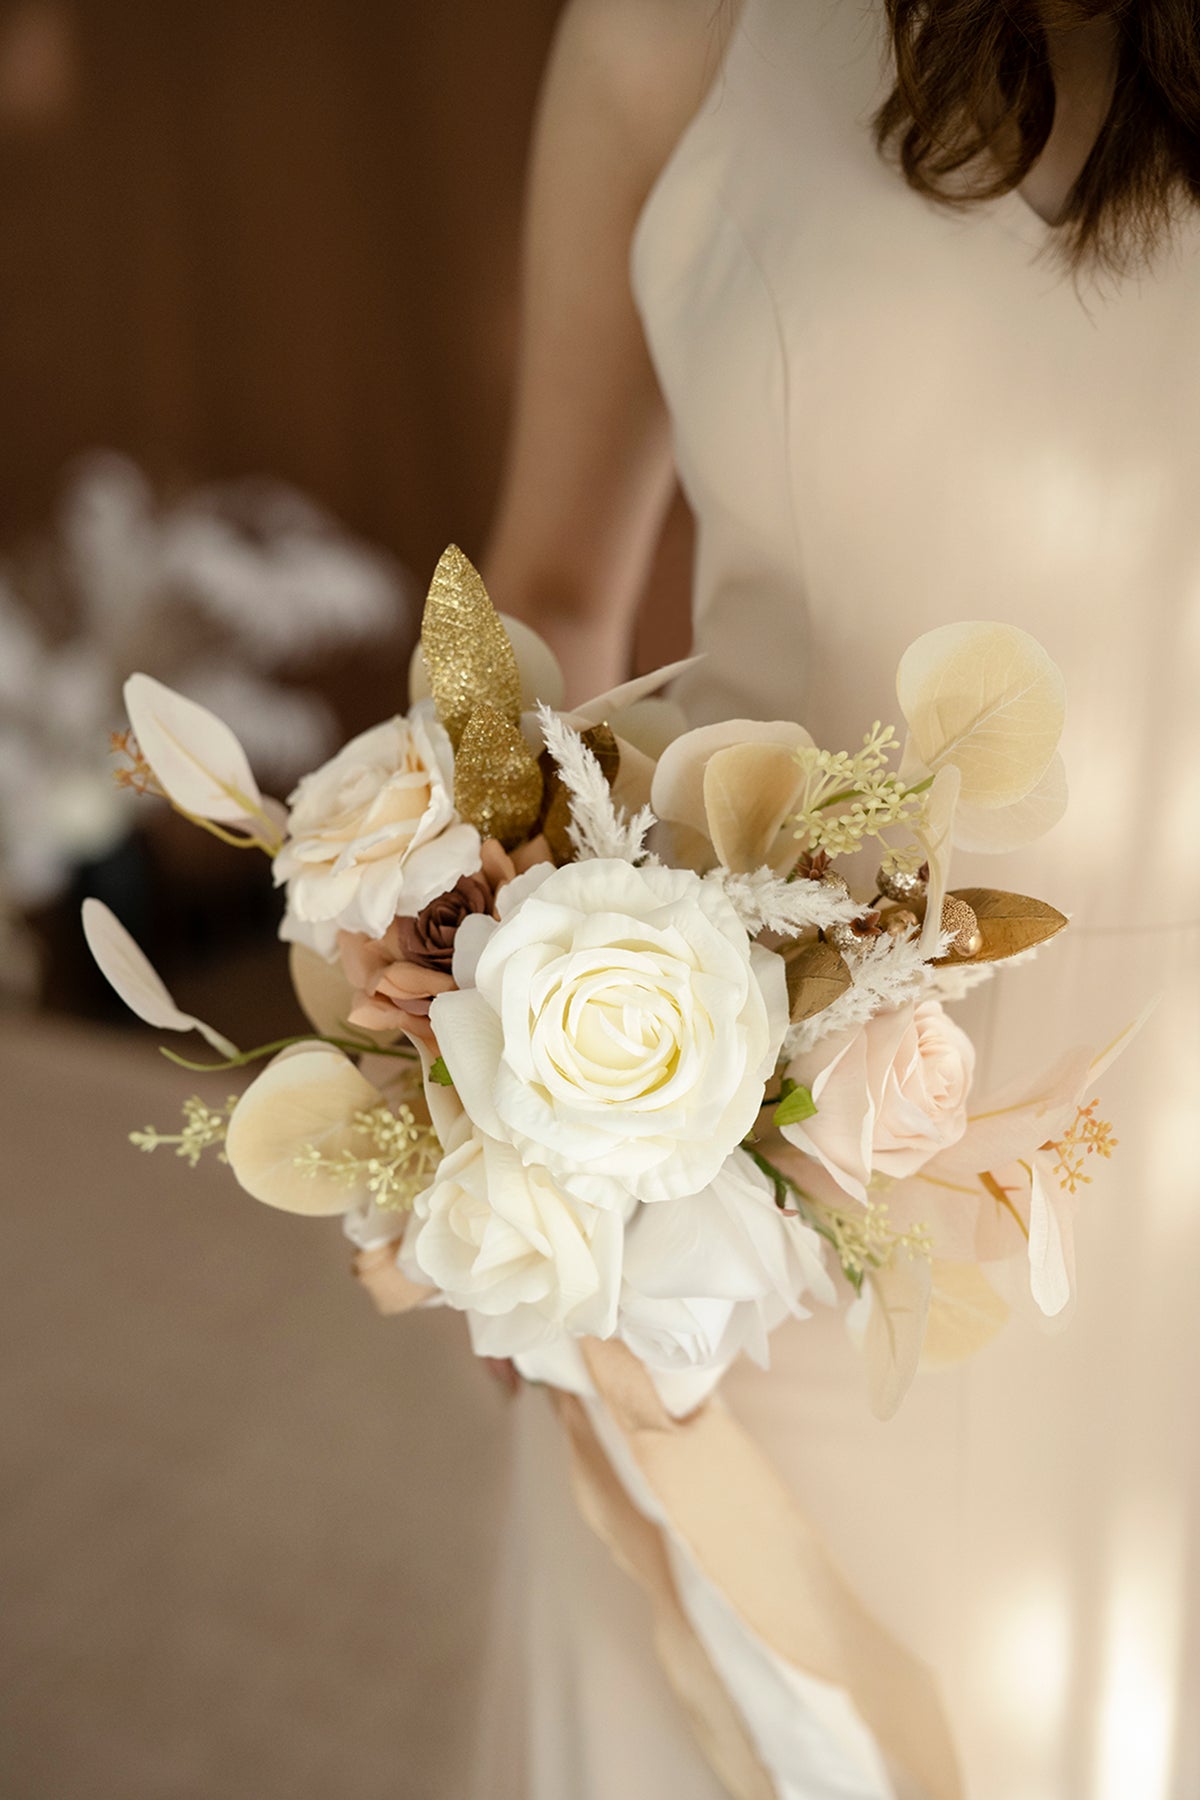 Additional Flower Decorations in White & Beige